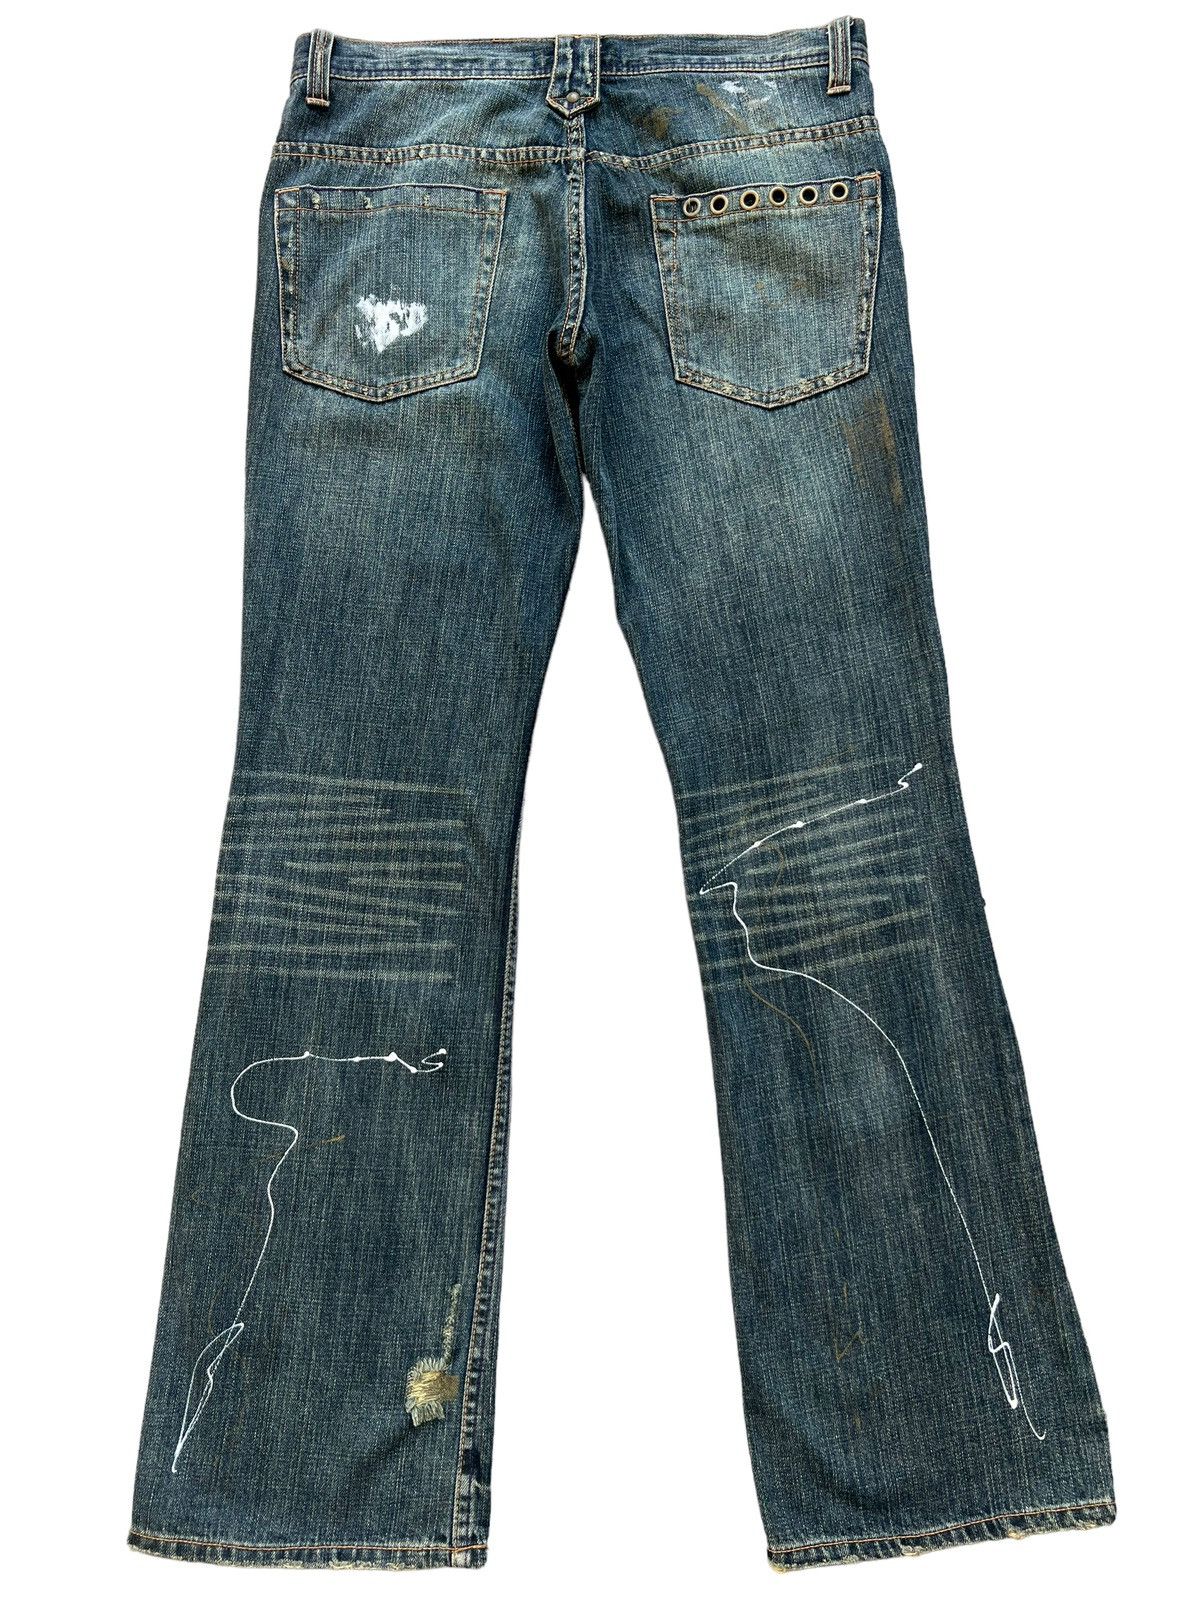 Hype - Roots Japan Distressed Riped Rusty Denim Painted Jeans 33x33 - 3